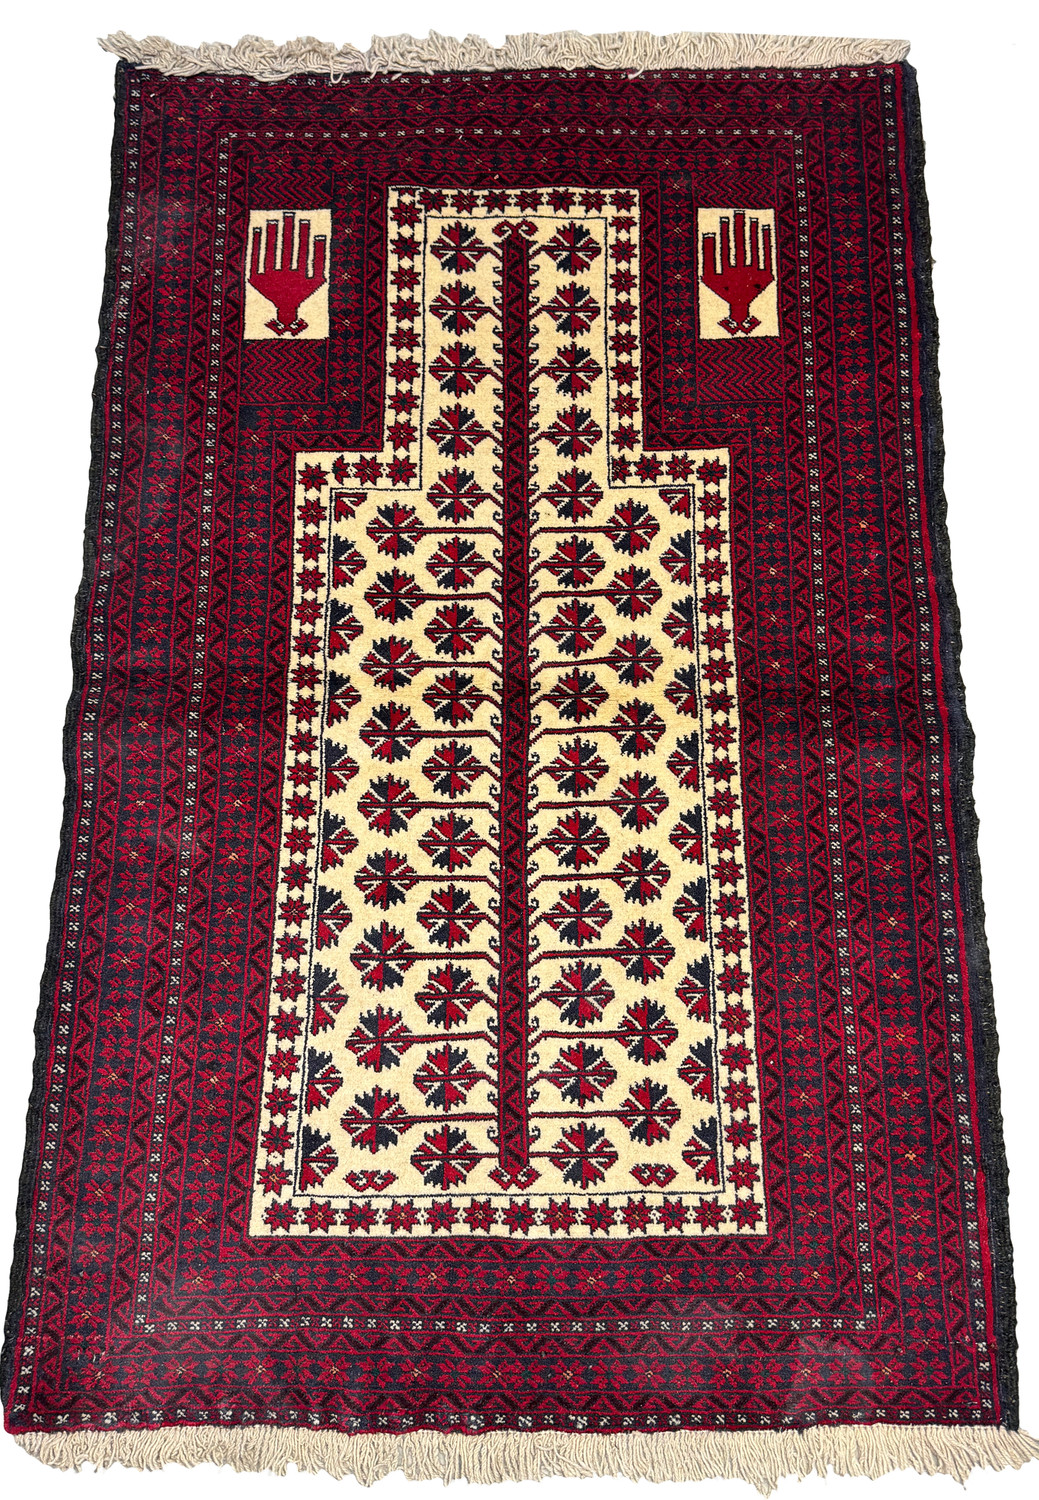 Top view of a Persian Baluch Prayer Rug, highlighting the red mihrab and detailed borders.